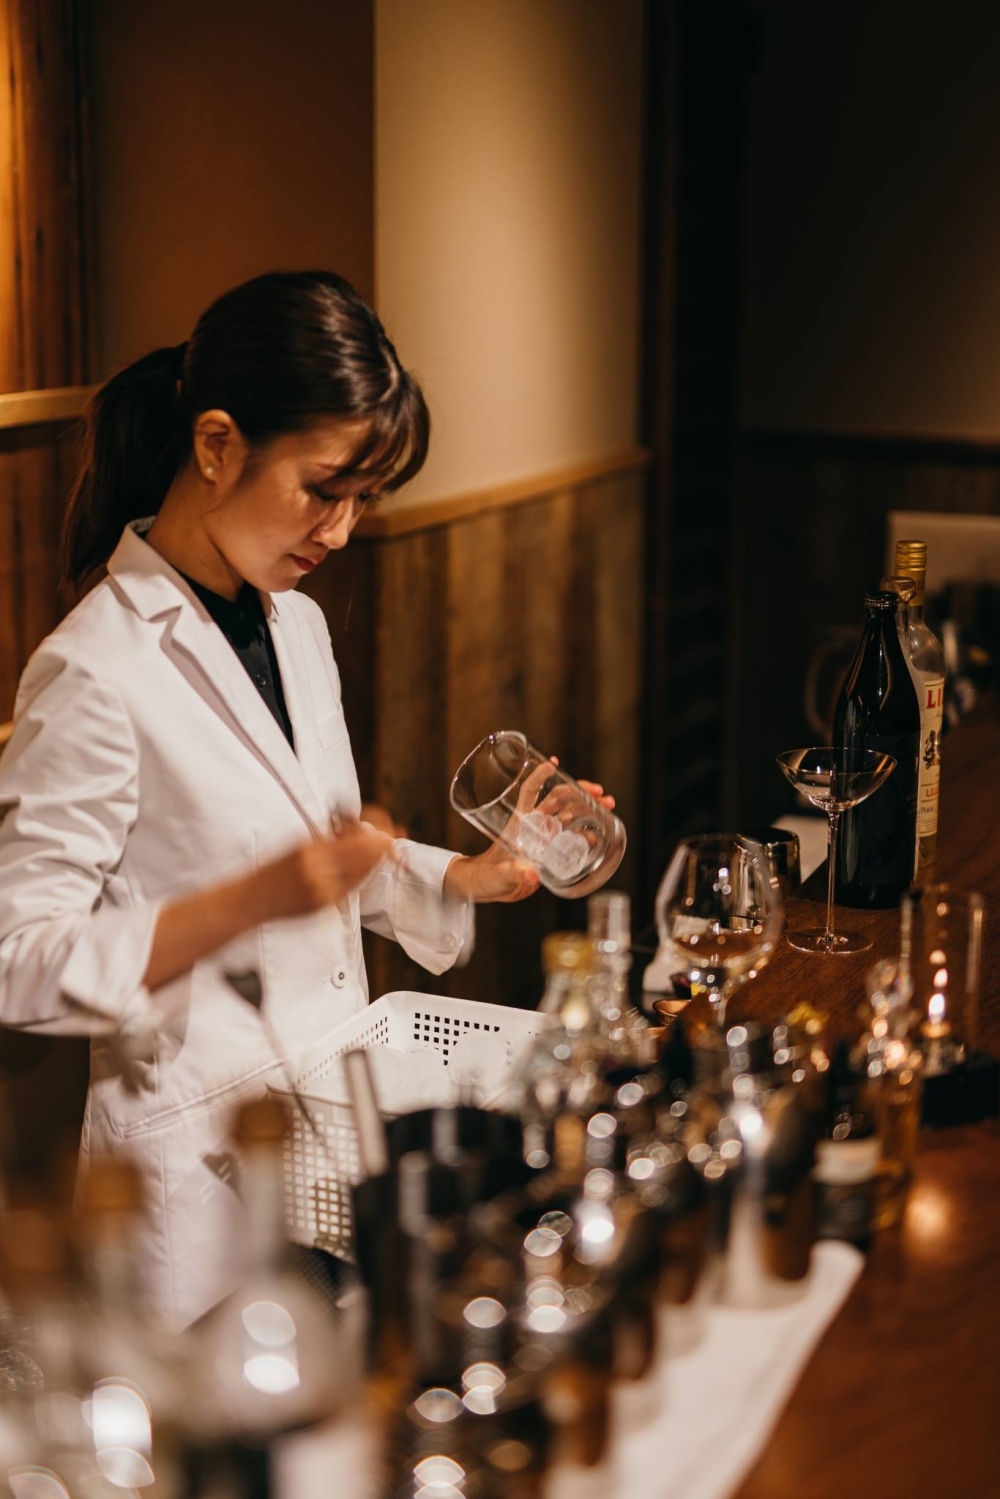 At Folklore, head bartender Yukino Sato delves into the terroir of Japanese cocktails.